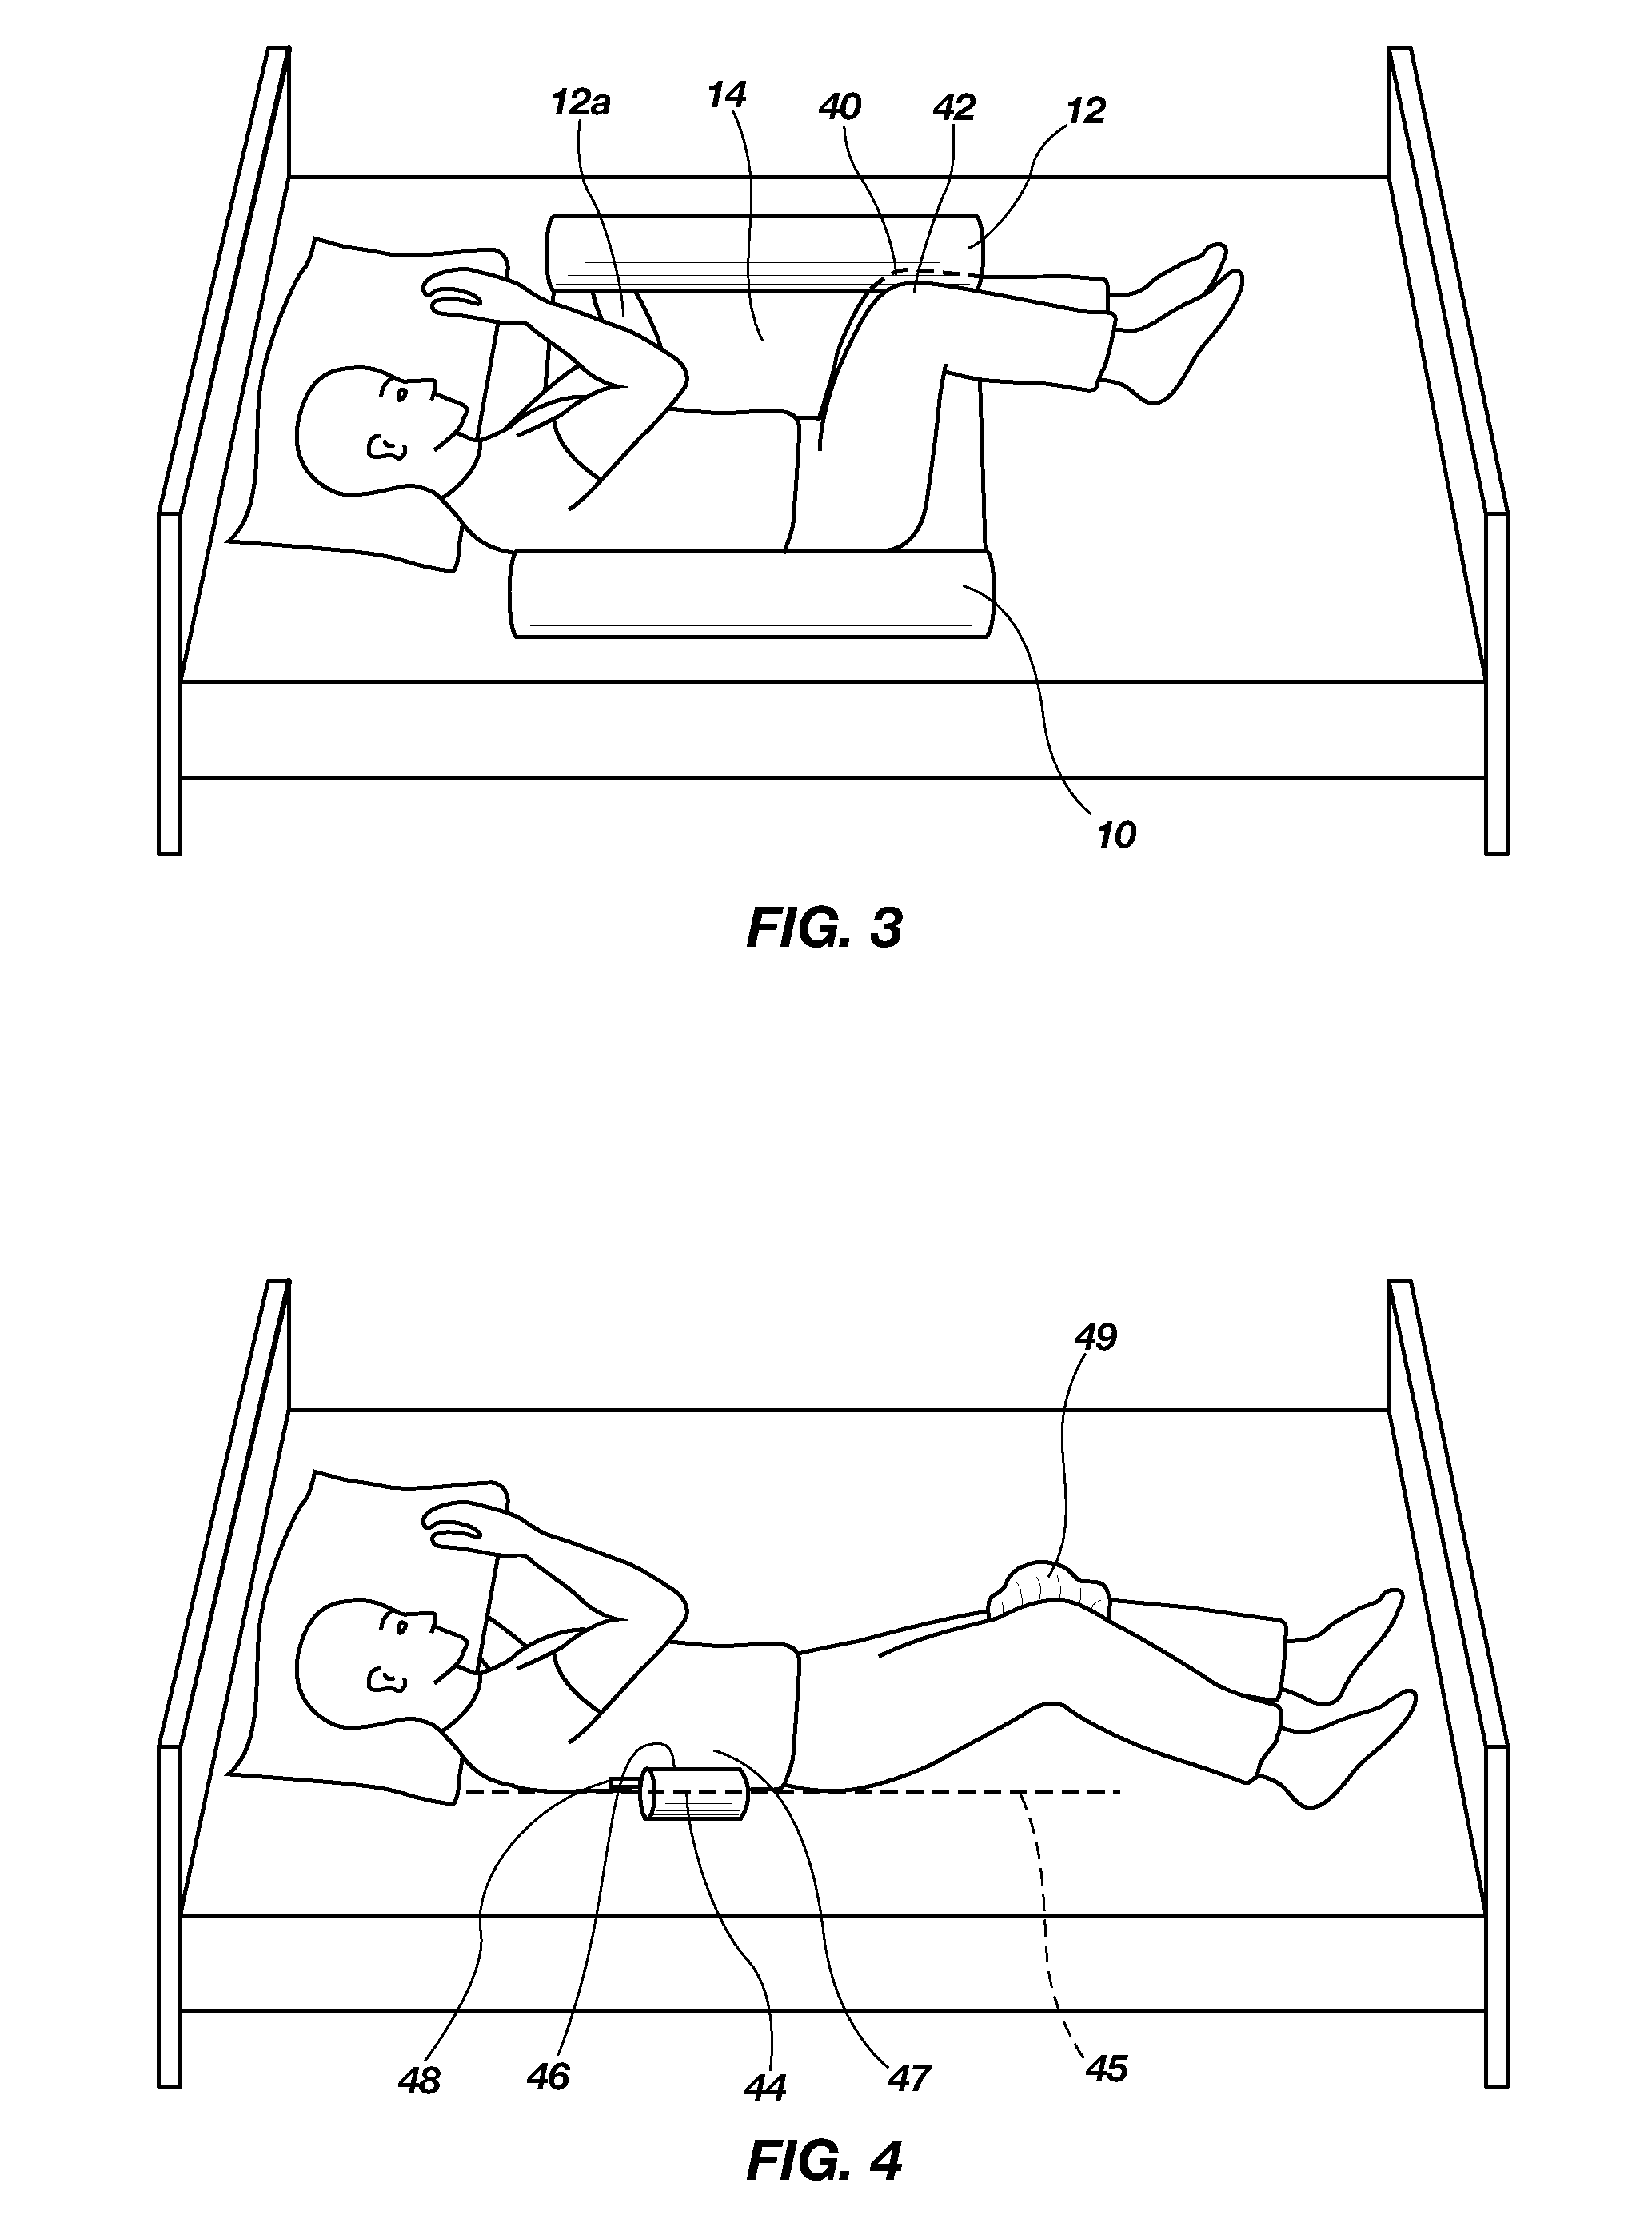 Suspended back pillow for sustaining a side sleeping position